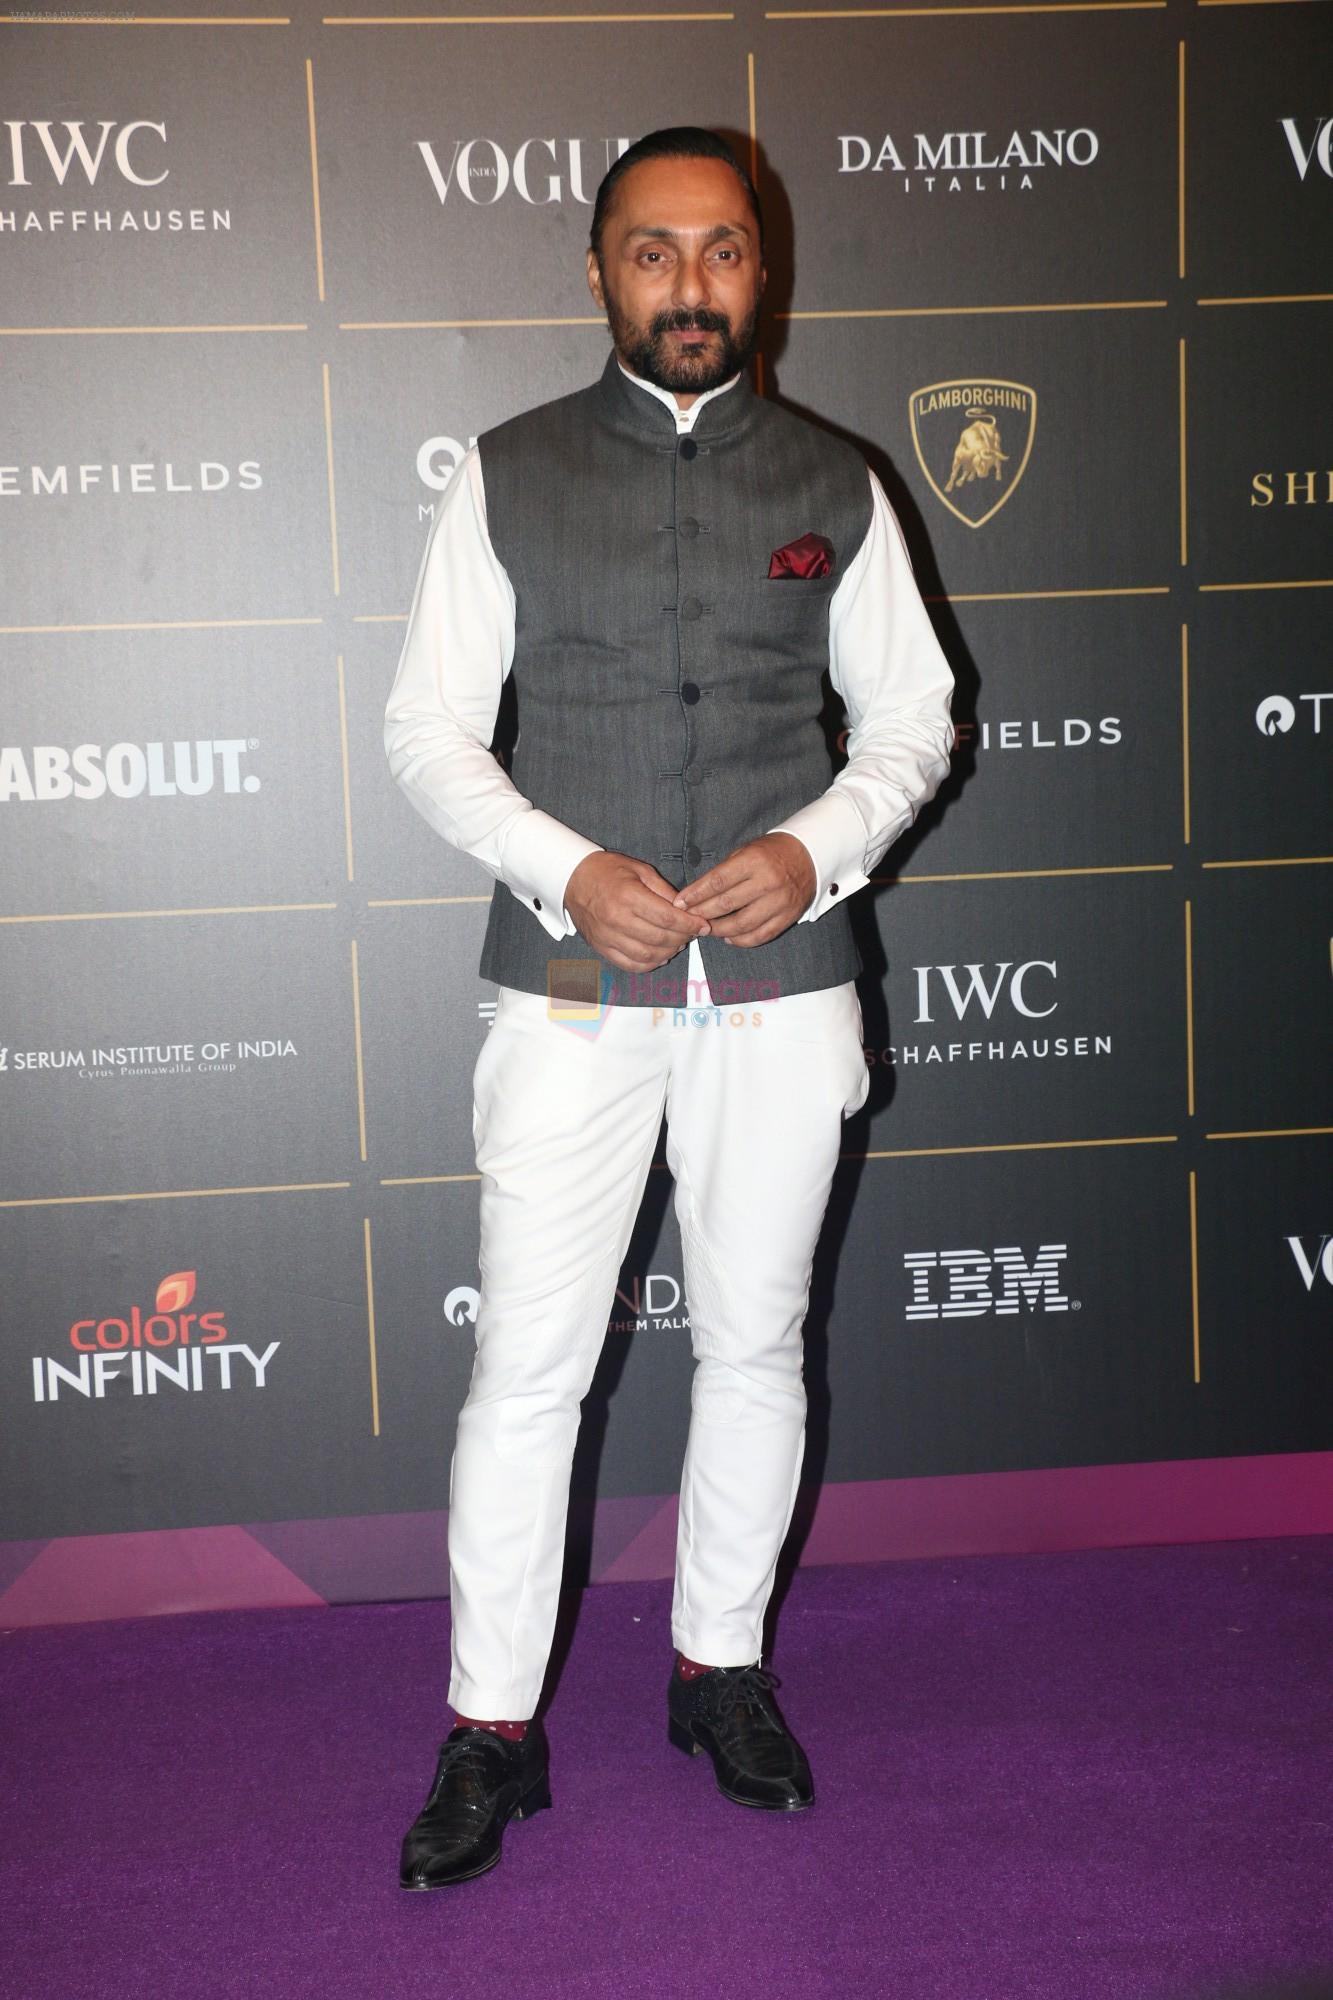 Rahul Bose at The Vogue Women Of The Year Awards 2018 on 27th Oct 2018